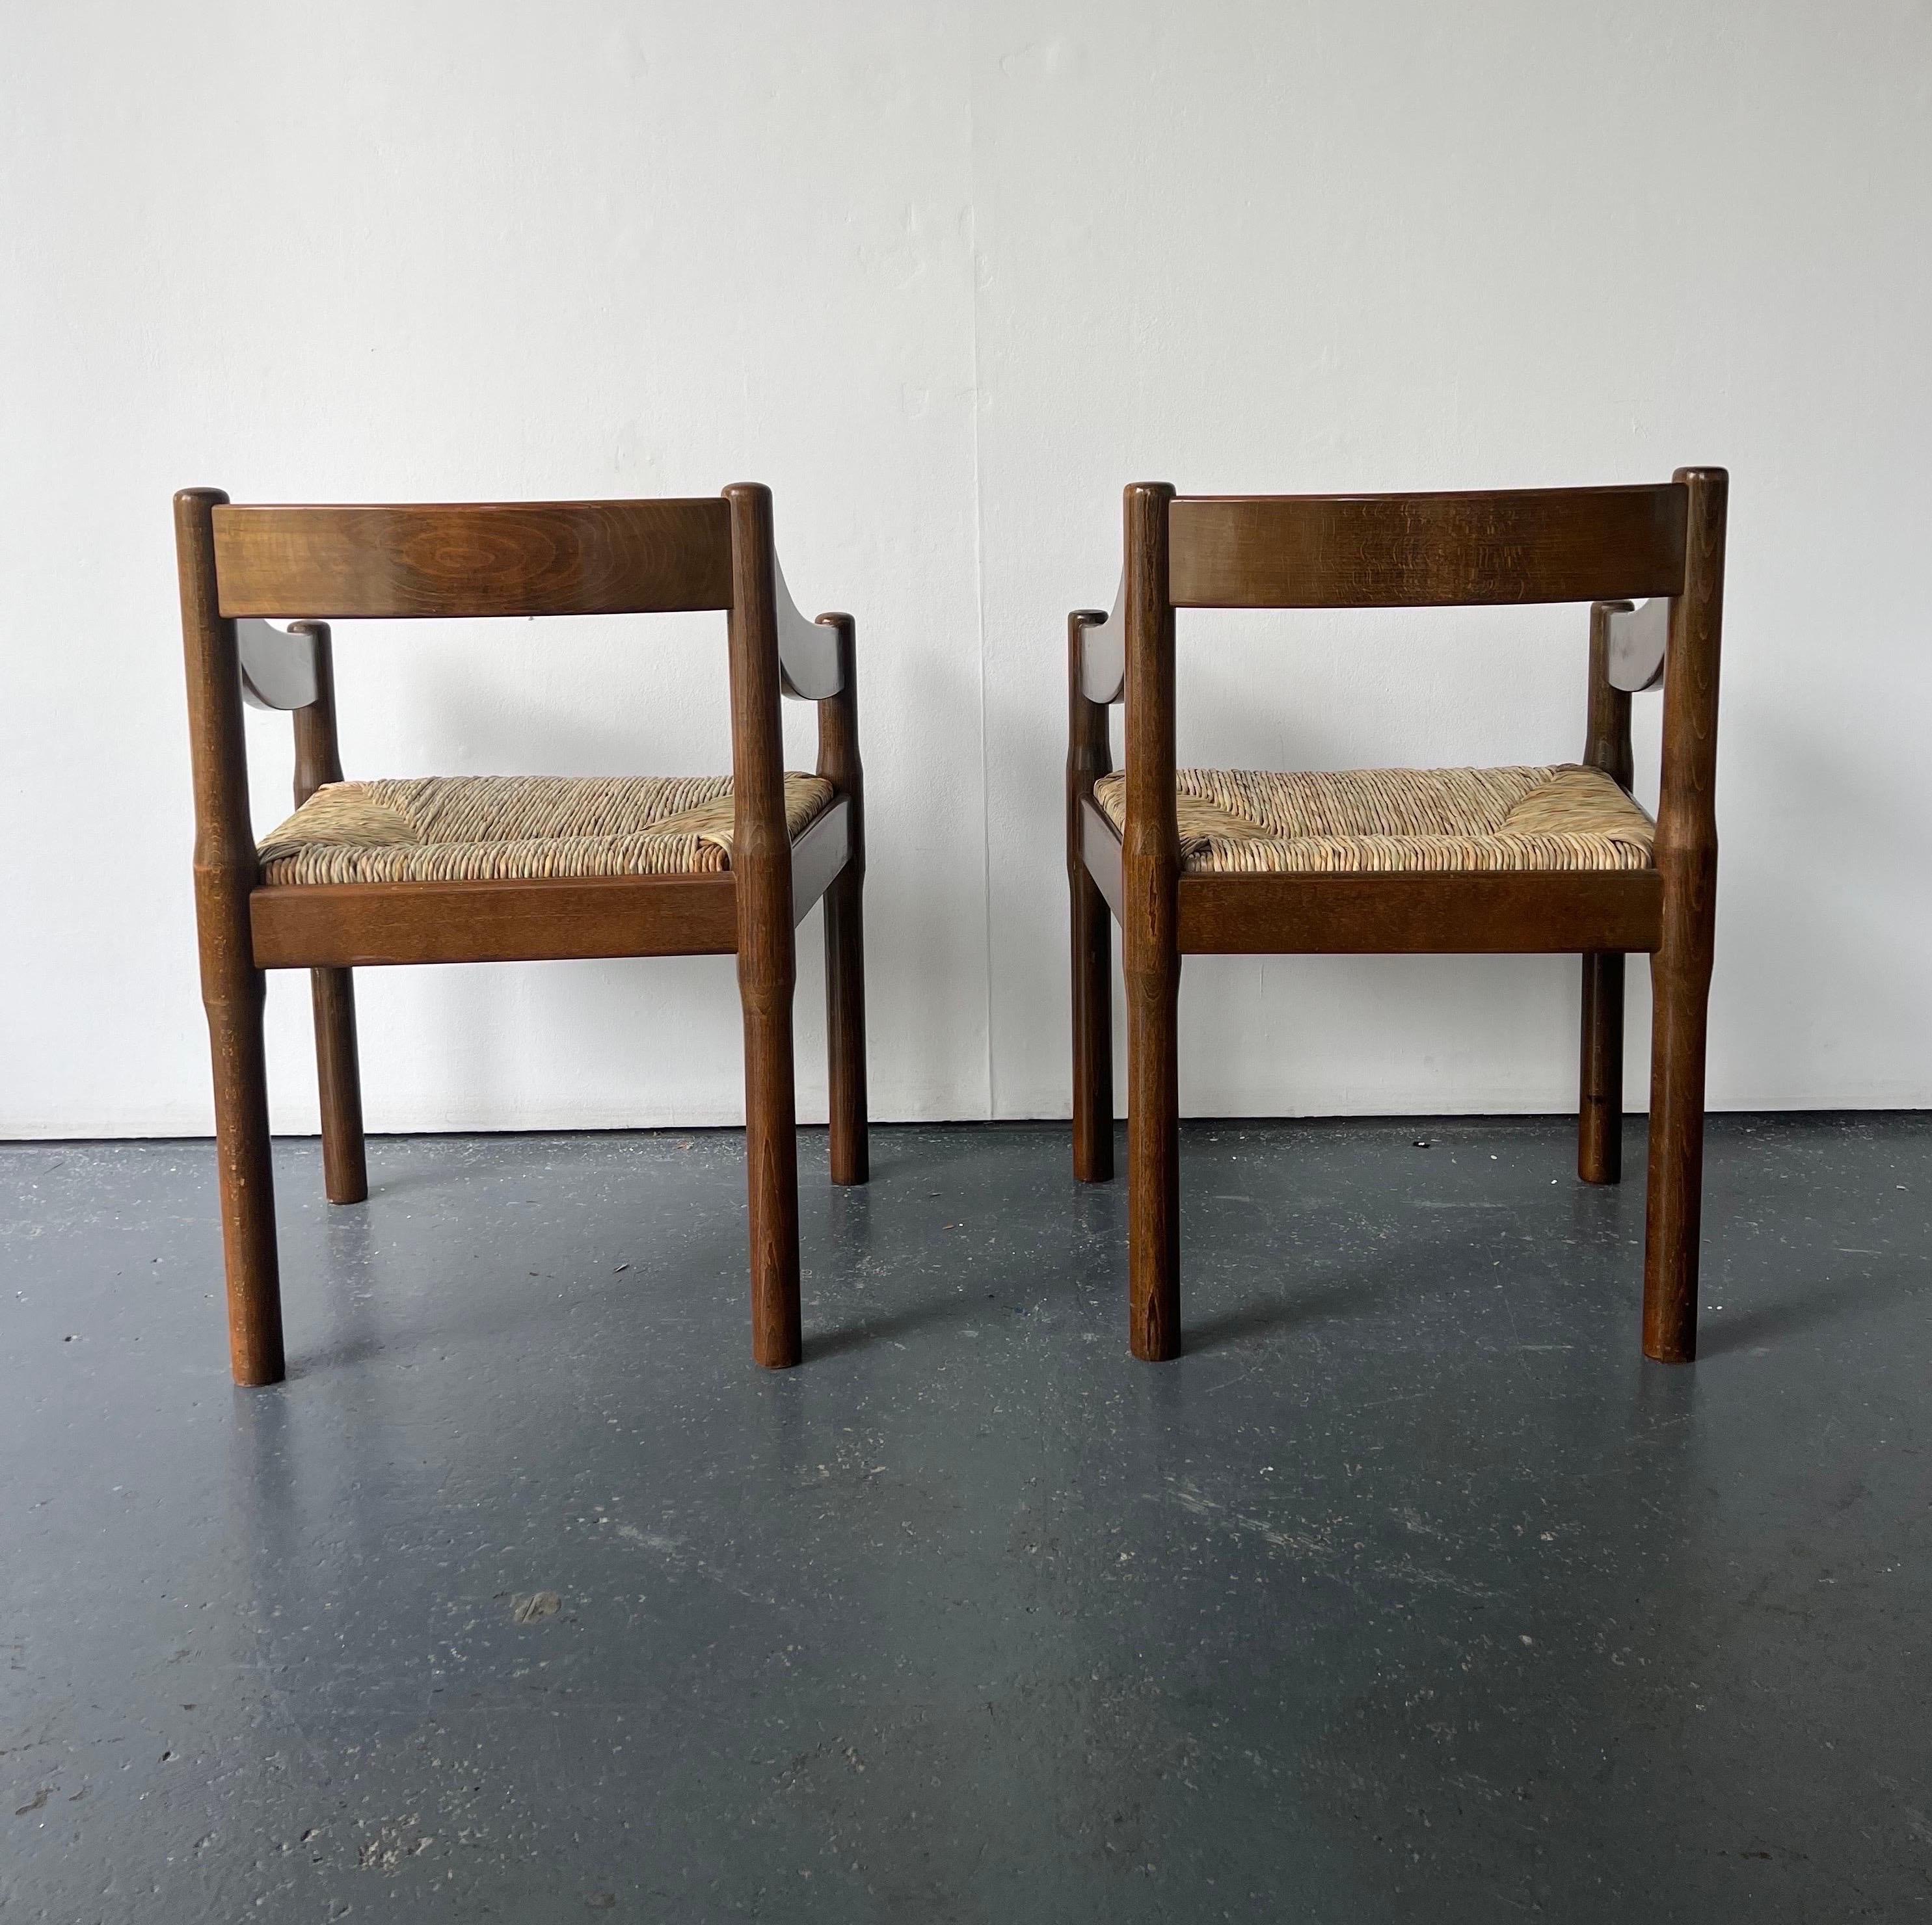 Beech Pair of Dark Wood Carimate Carver Chairs by Vico Magistretti